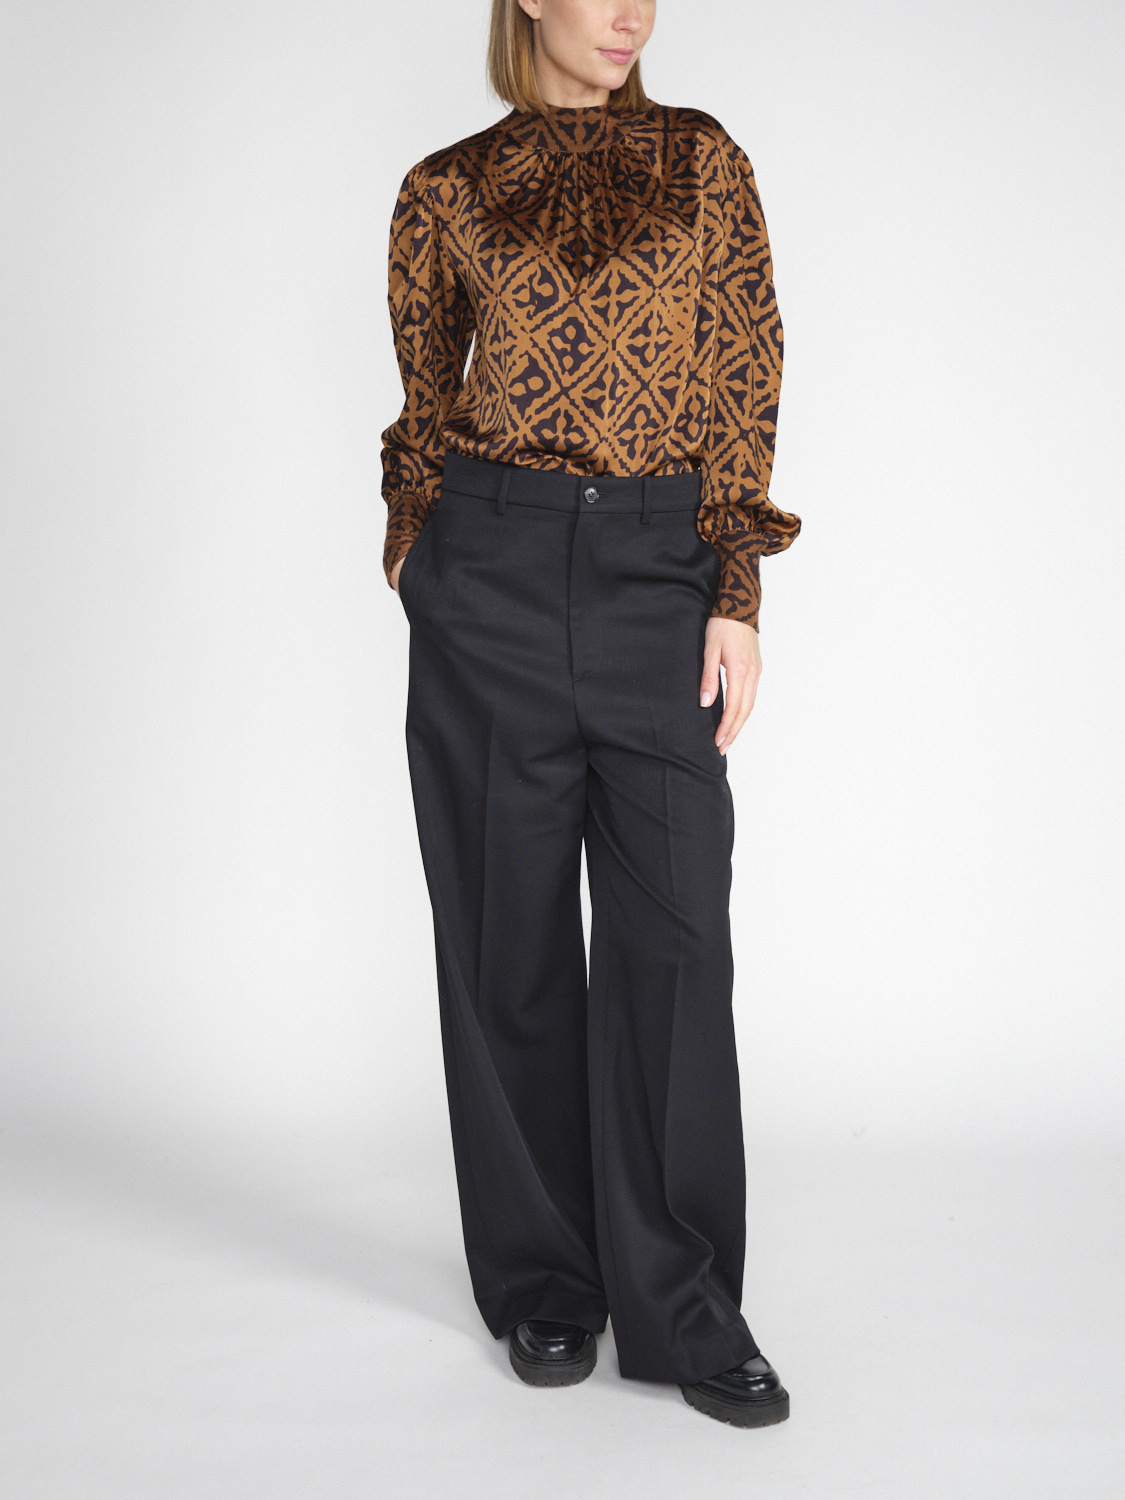 friendly hunting Call Eyes of Marrakesh - Silk blouse with ornamental print  multi L